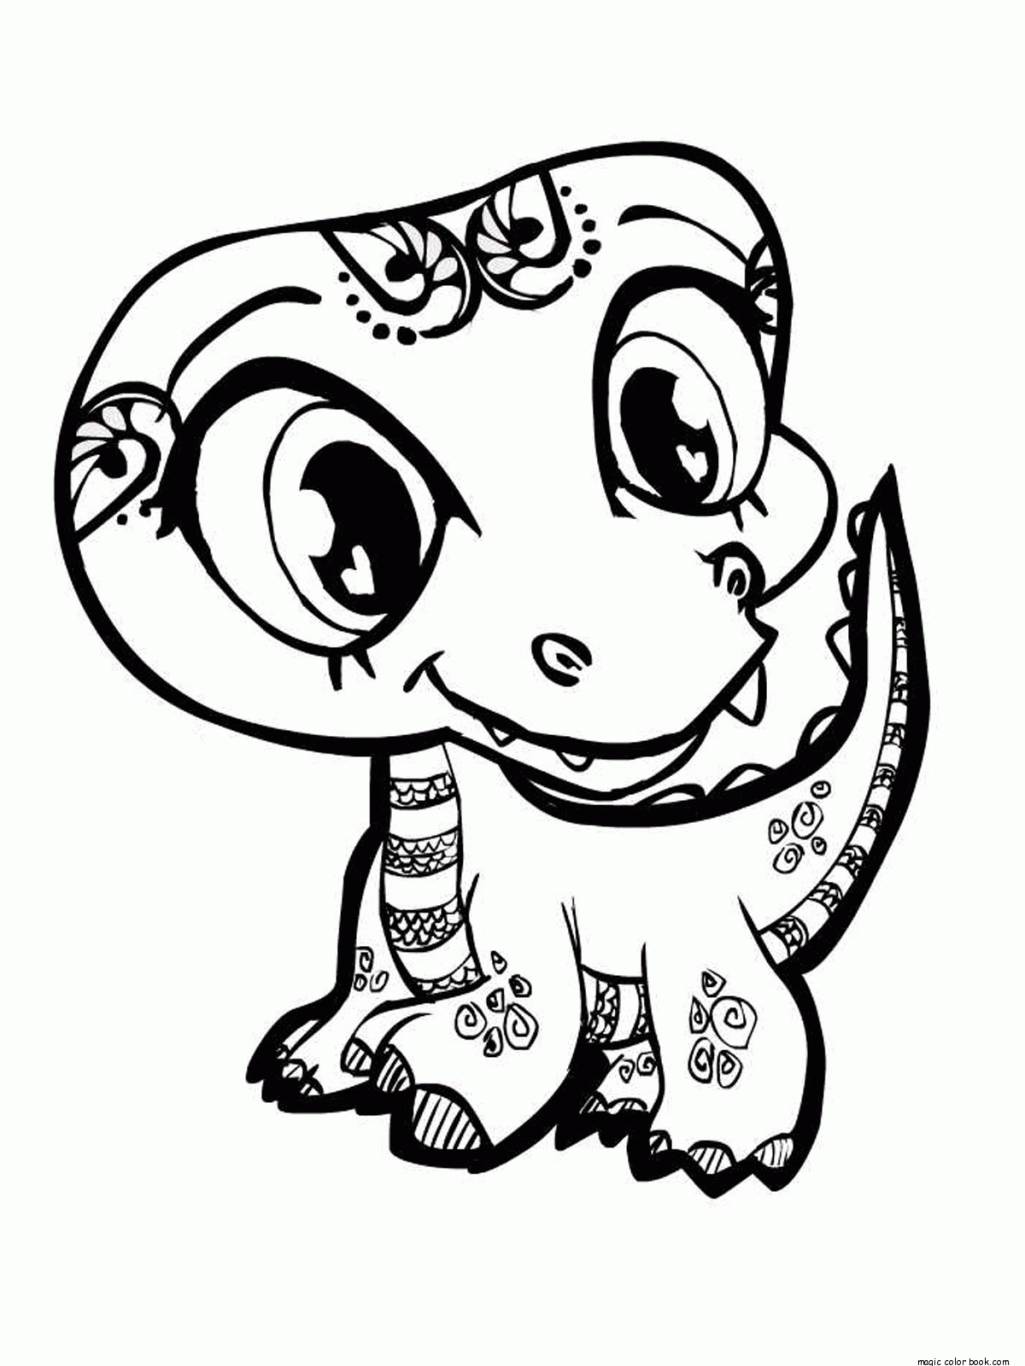 Cute Animal Coloring Pages Icolorings Really Cute Animals Coloring